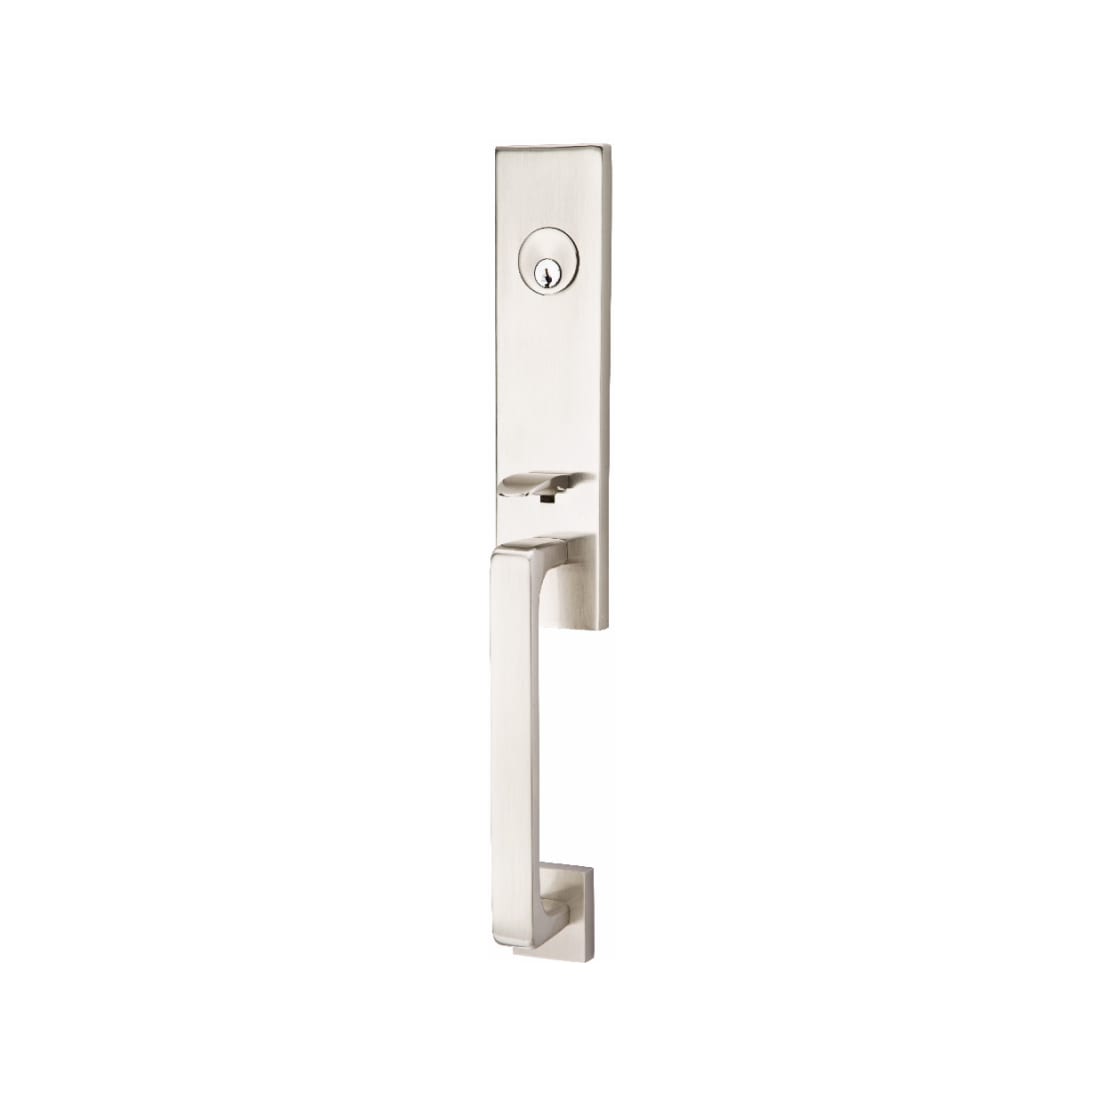 EMTEK Mormont Mortise Entry Set with Matching Finish Windsor Crystal Knob  Choice of Left/Right Handing Available in Finishes F20334750WSRHUS4 